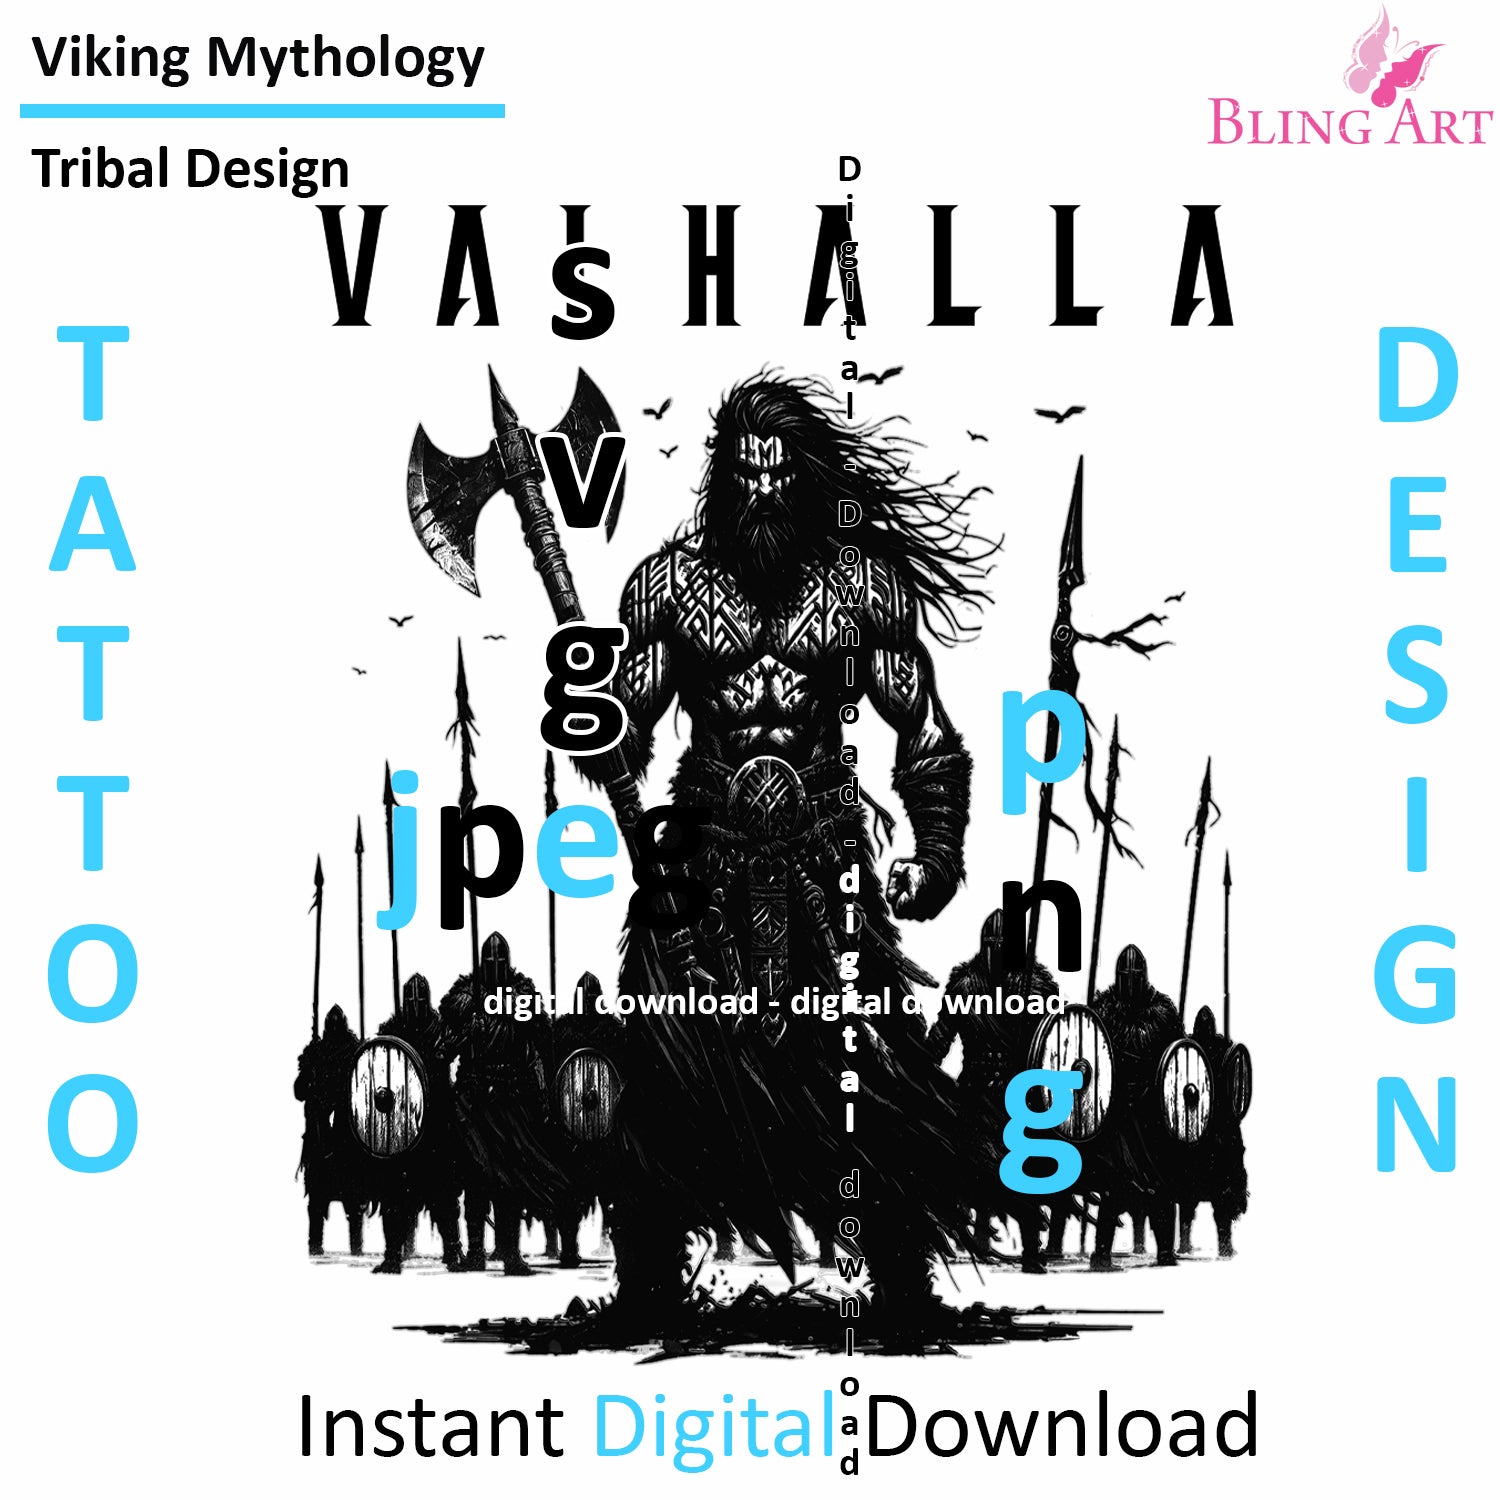 Viking Valhalla Army - Digital Design (PNG, JPEG, SVG) - Instant Download for Tattoos, T-Shirts, Wall Art